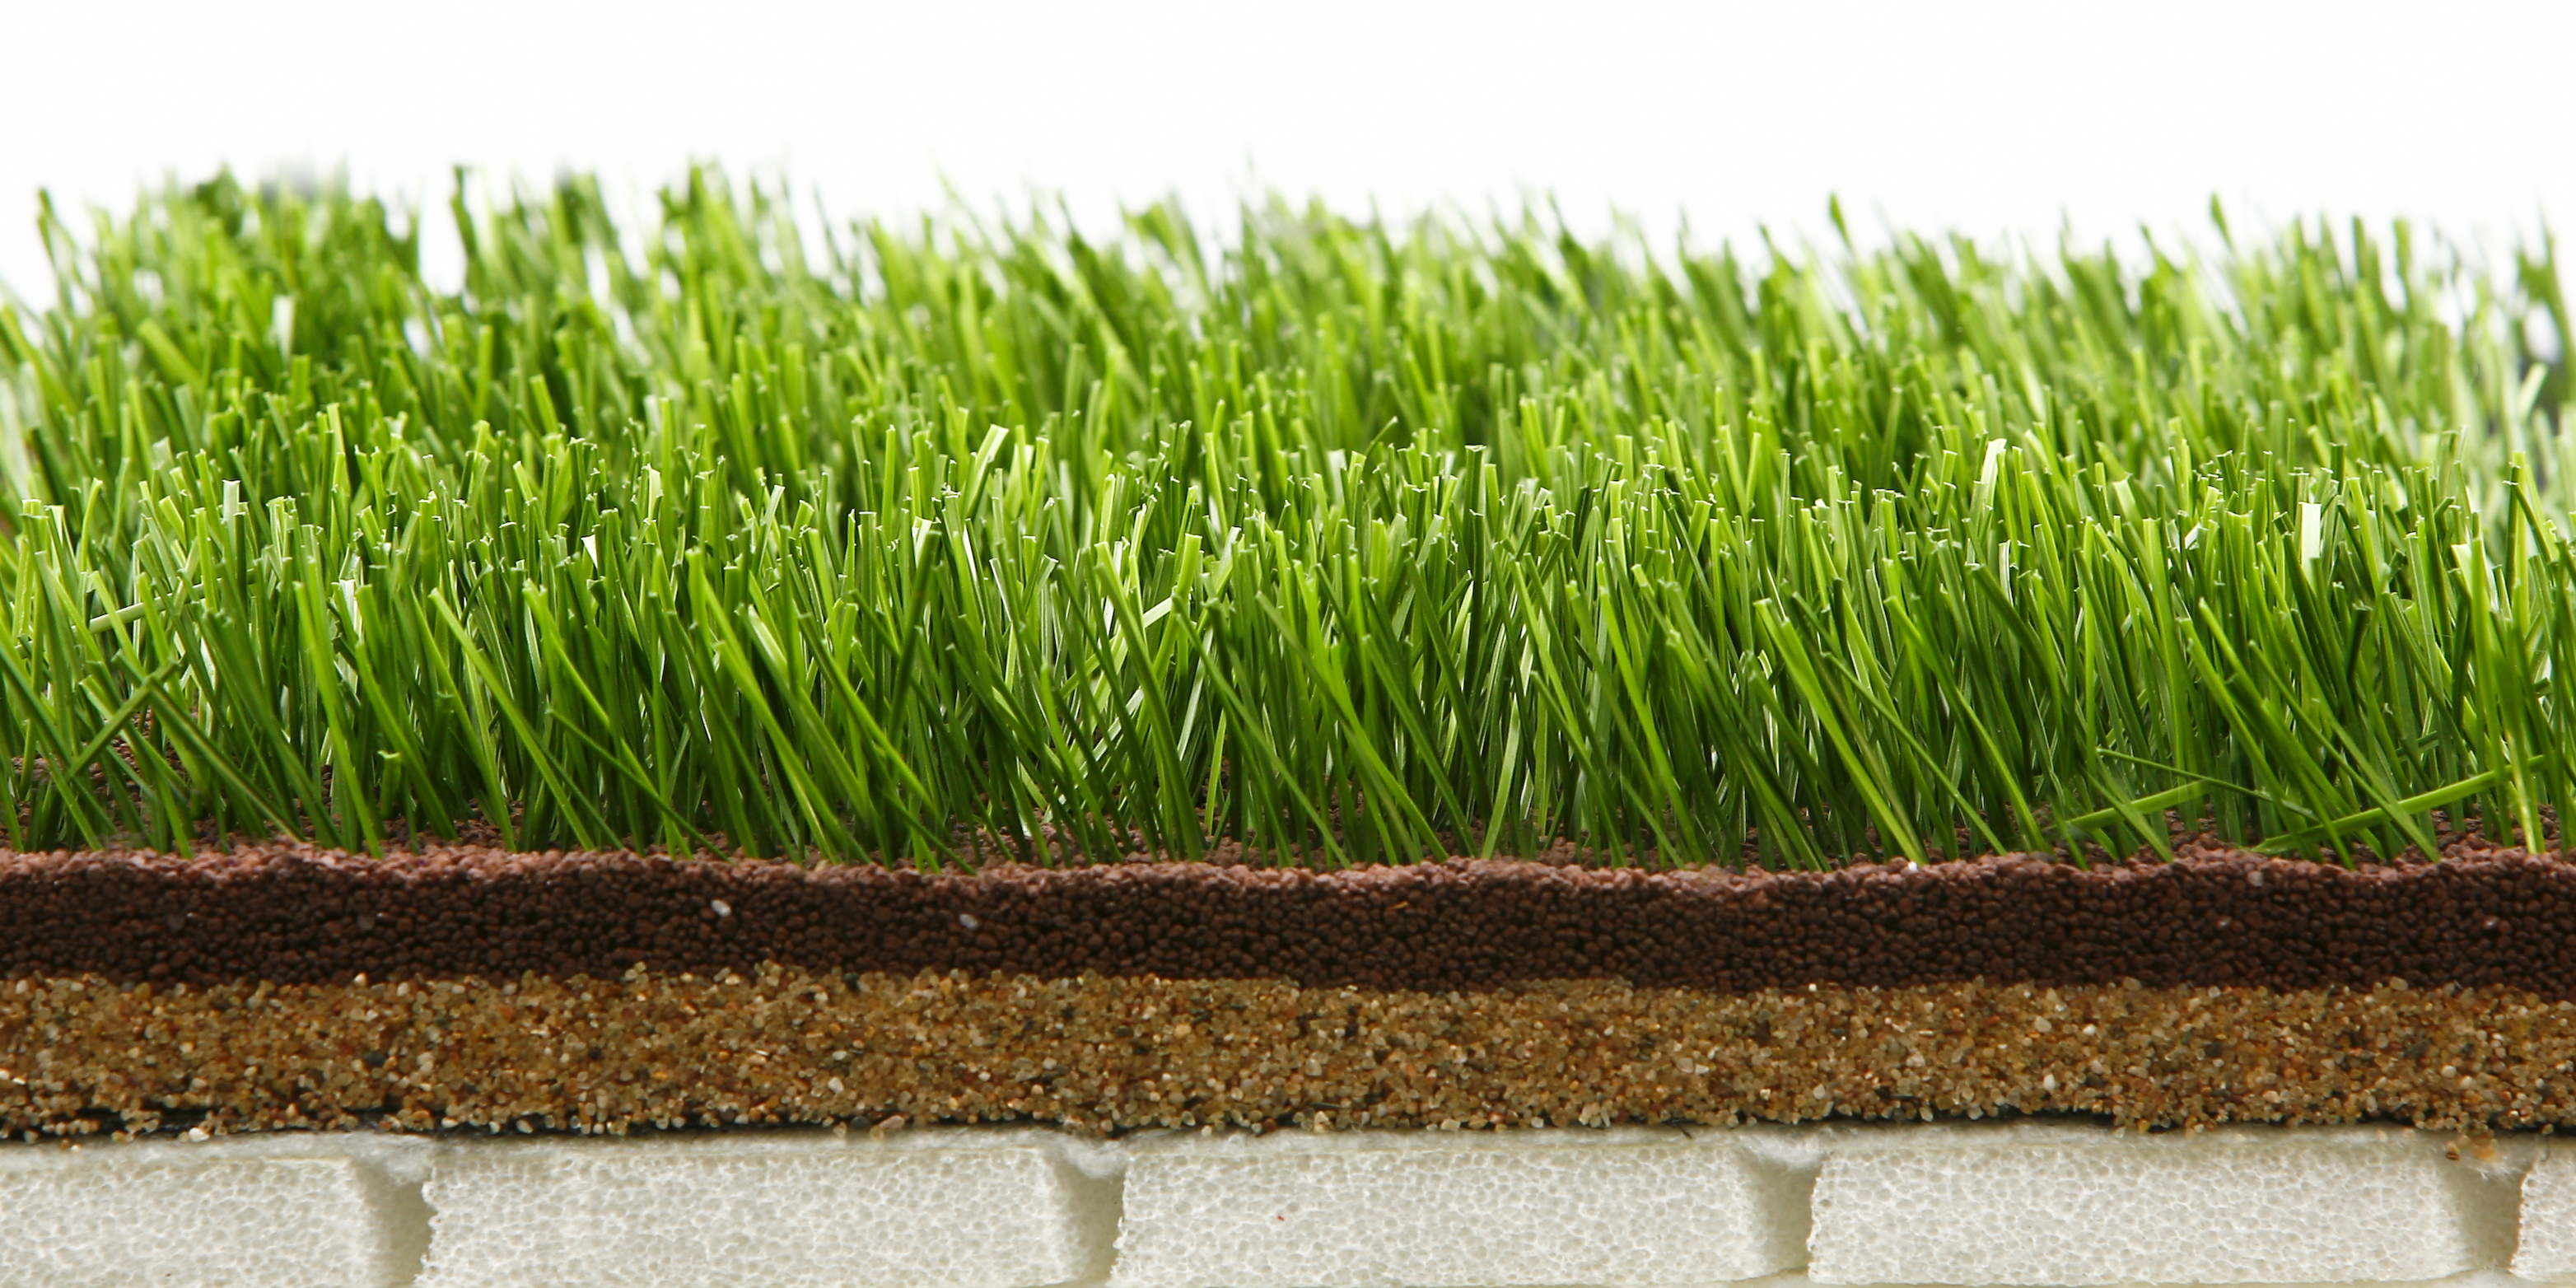 Why spread sand on artificial grass?